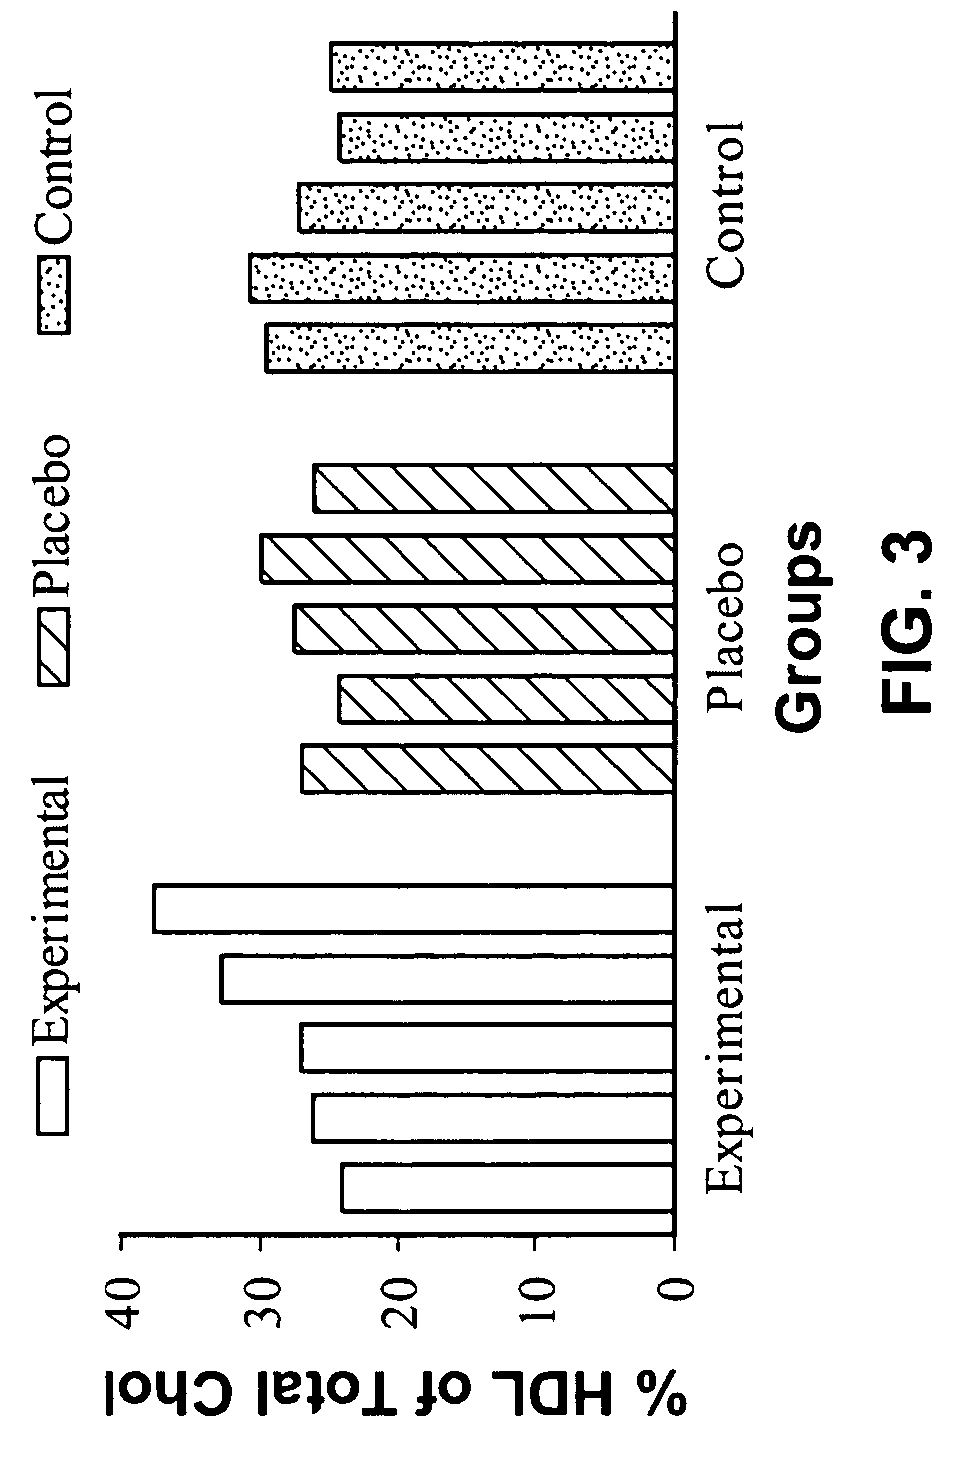 Nucleotide based medicament and method of use for treatment of conditions in humans